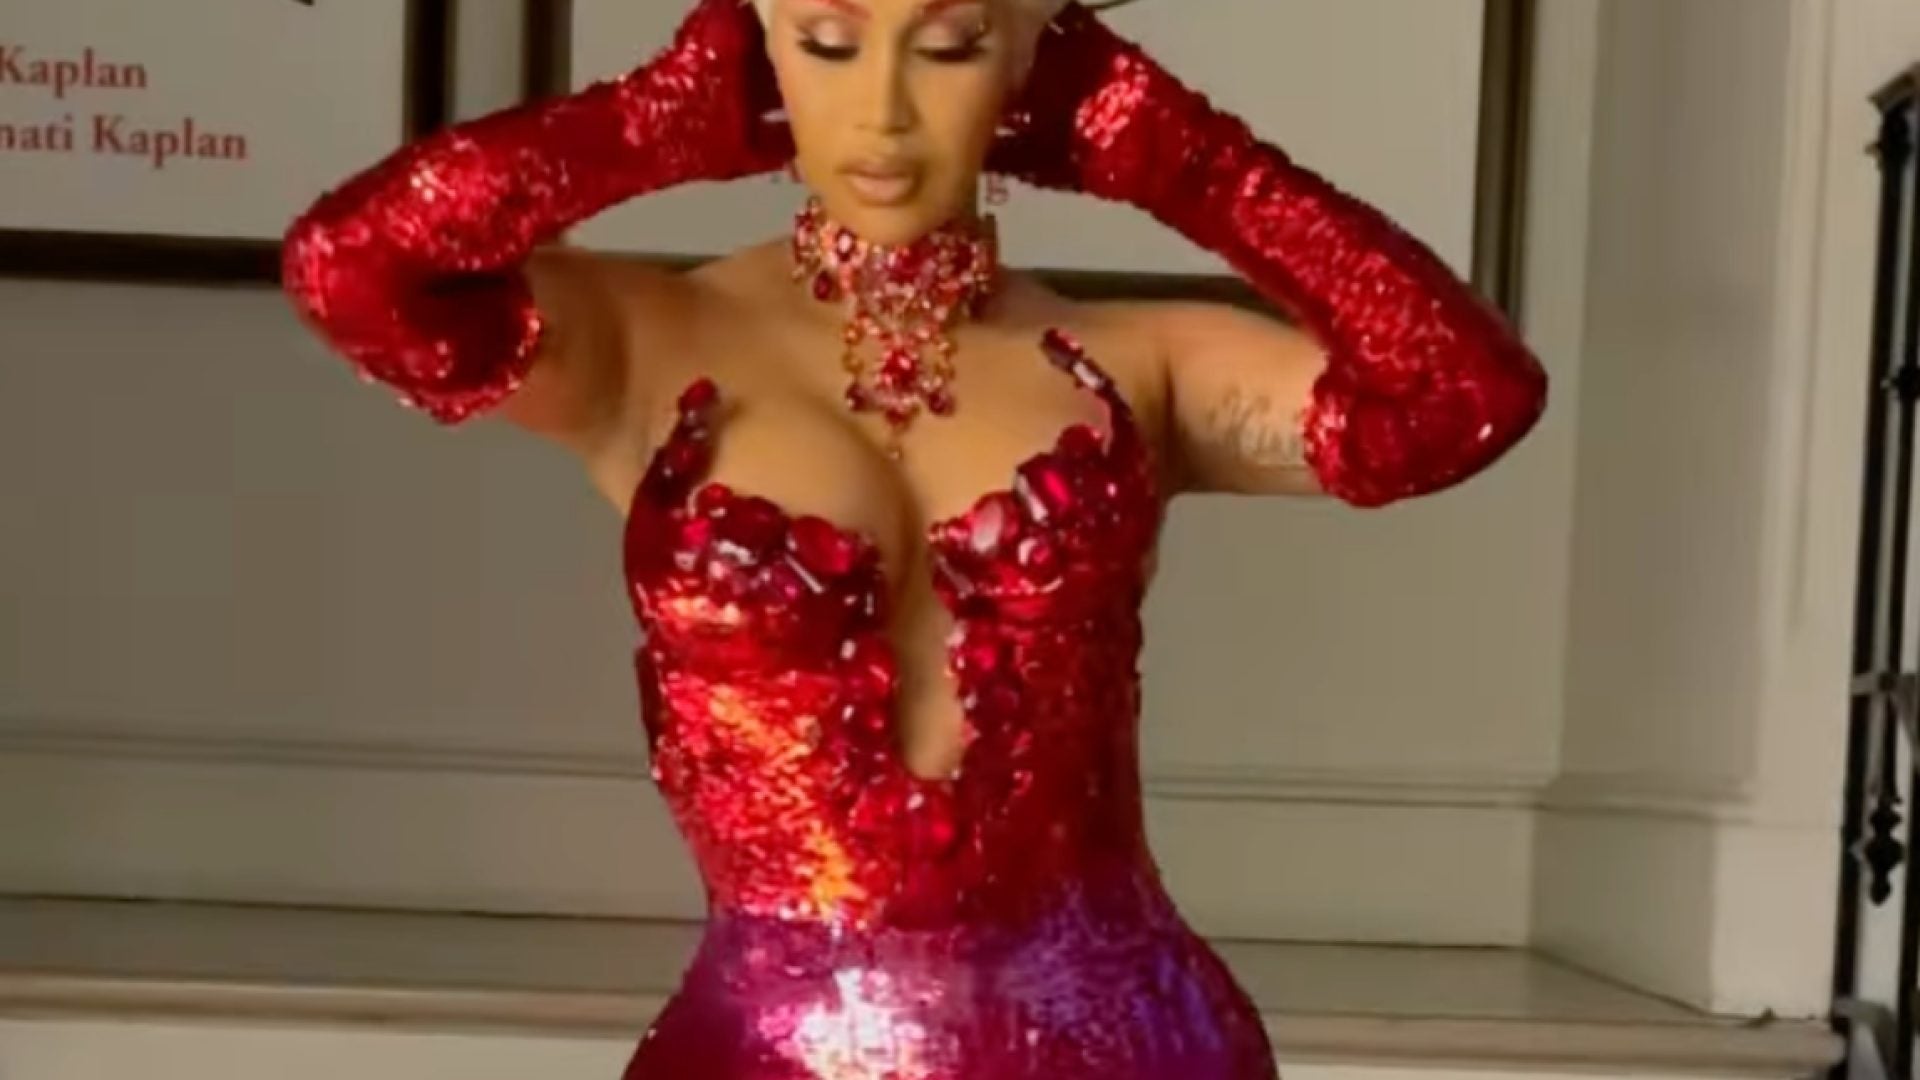 Cardi B Is Winning Paris Fashion Week While Dealing With A Changing Postpartum Body: 'My Skin Is Still Loose'